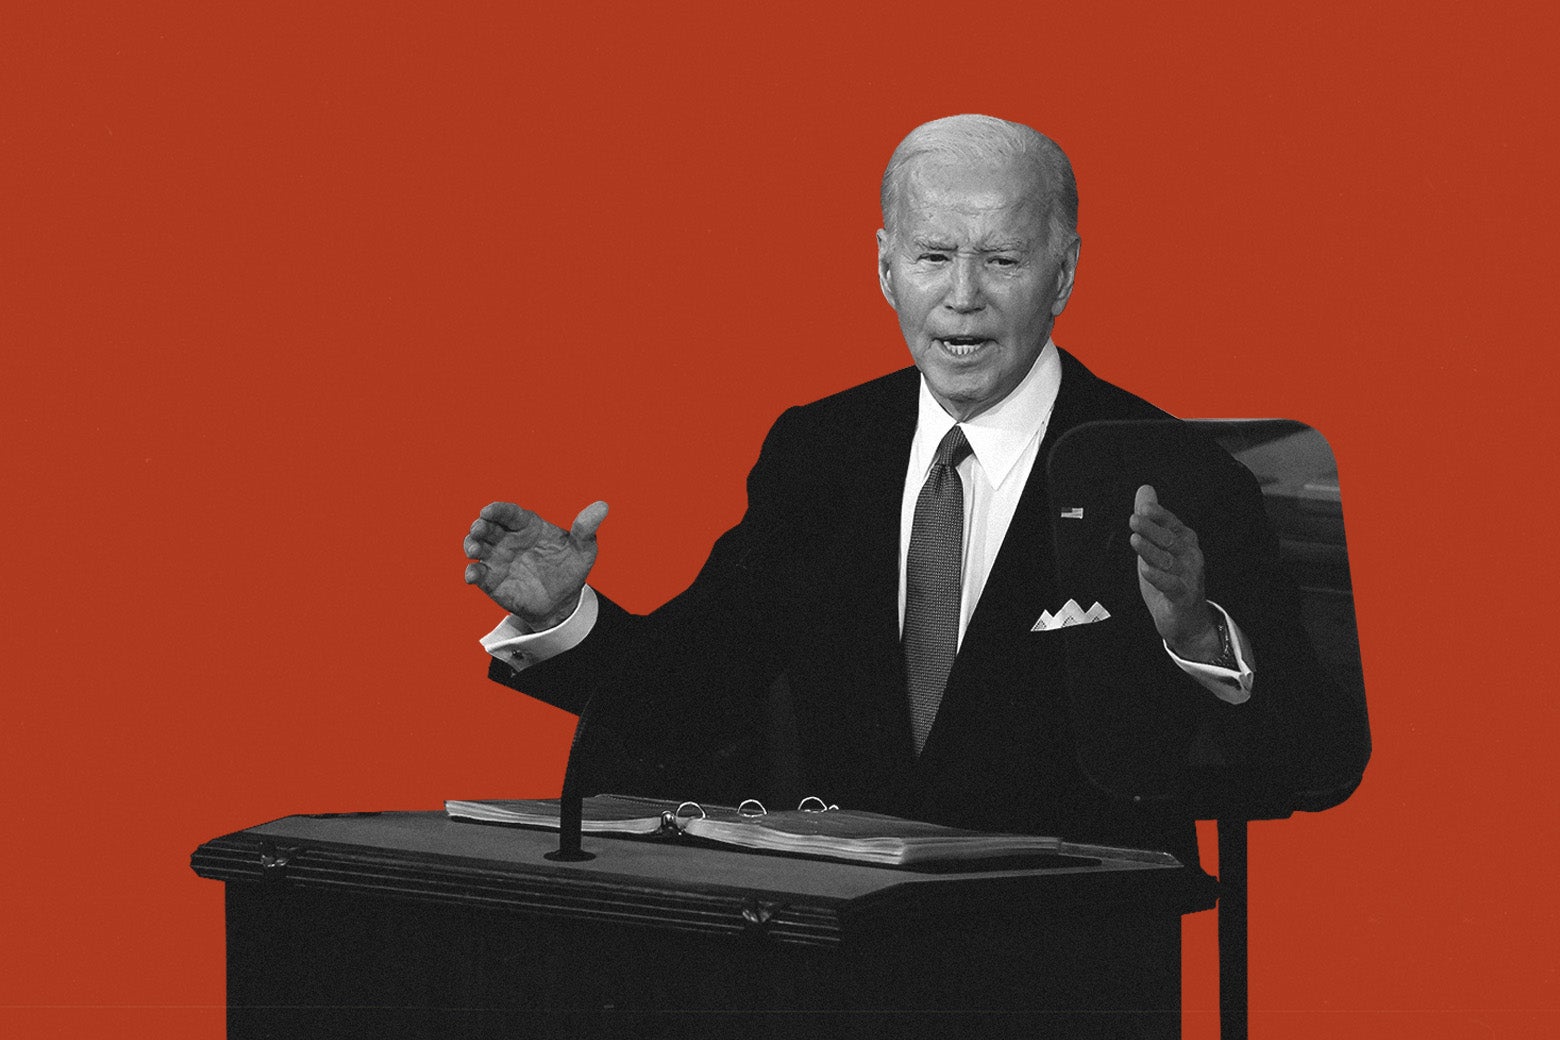 Joe Biden speaks from a lectern during the address; the photo is black and white and the background is strikingly red. 